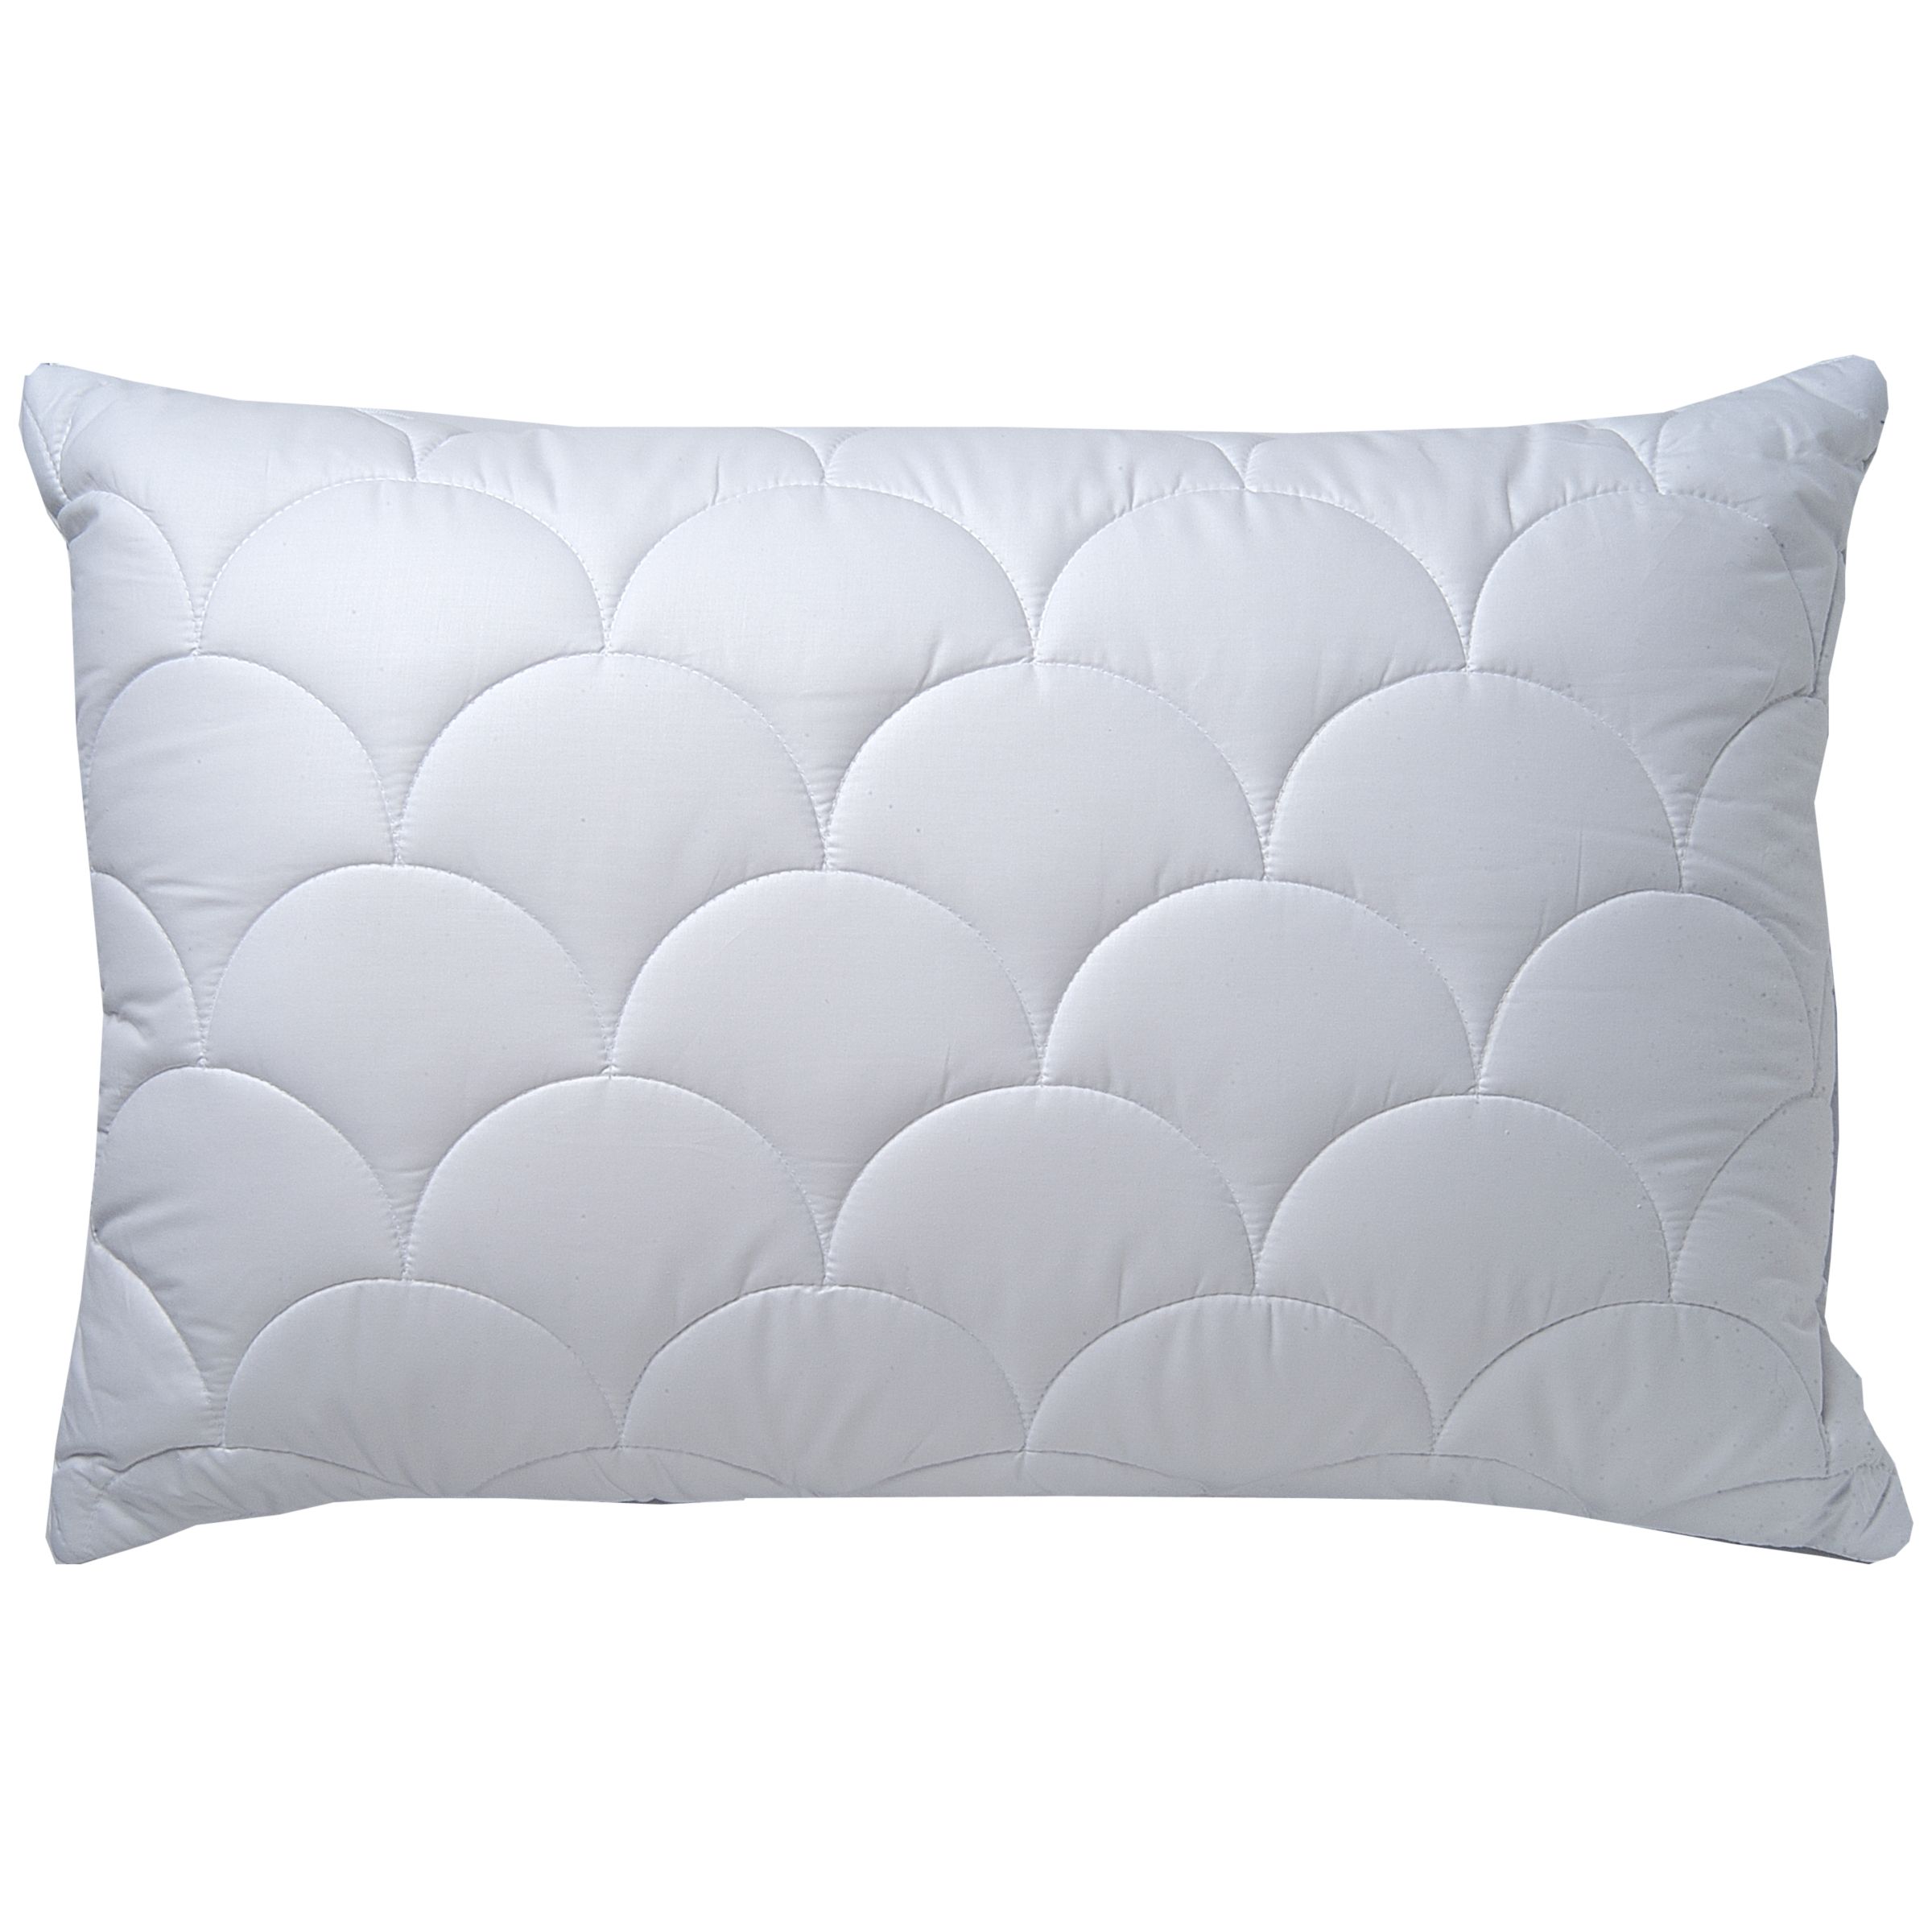 John Lewis Siliconised Cluster Fibre Quilted Pillow